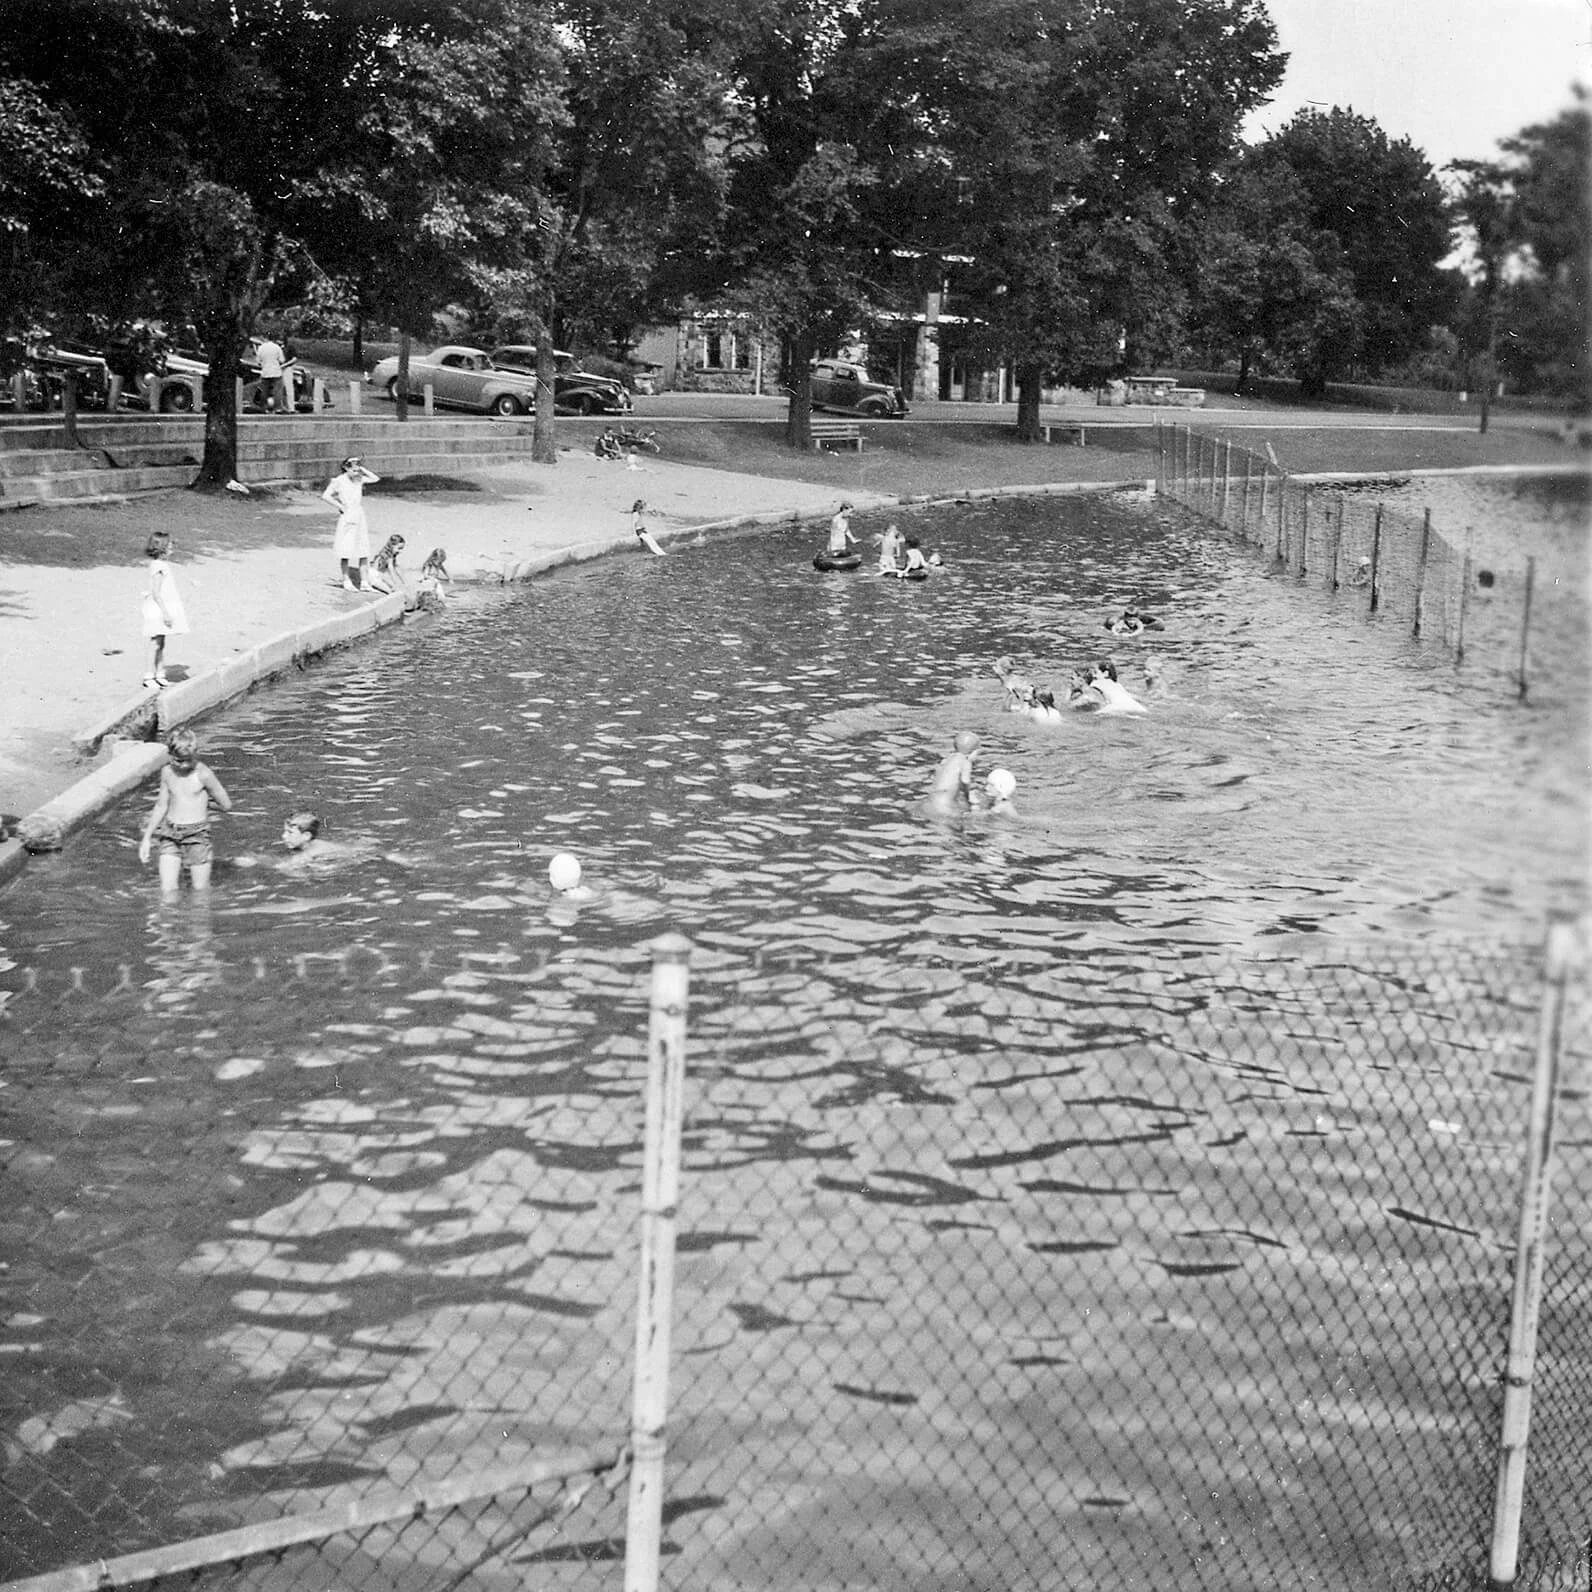 Black and white photo of a lake shoreline with sandy beach, full of children swimming with their parents. A chain link fence divides the deep area from the shallow area.